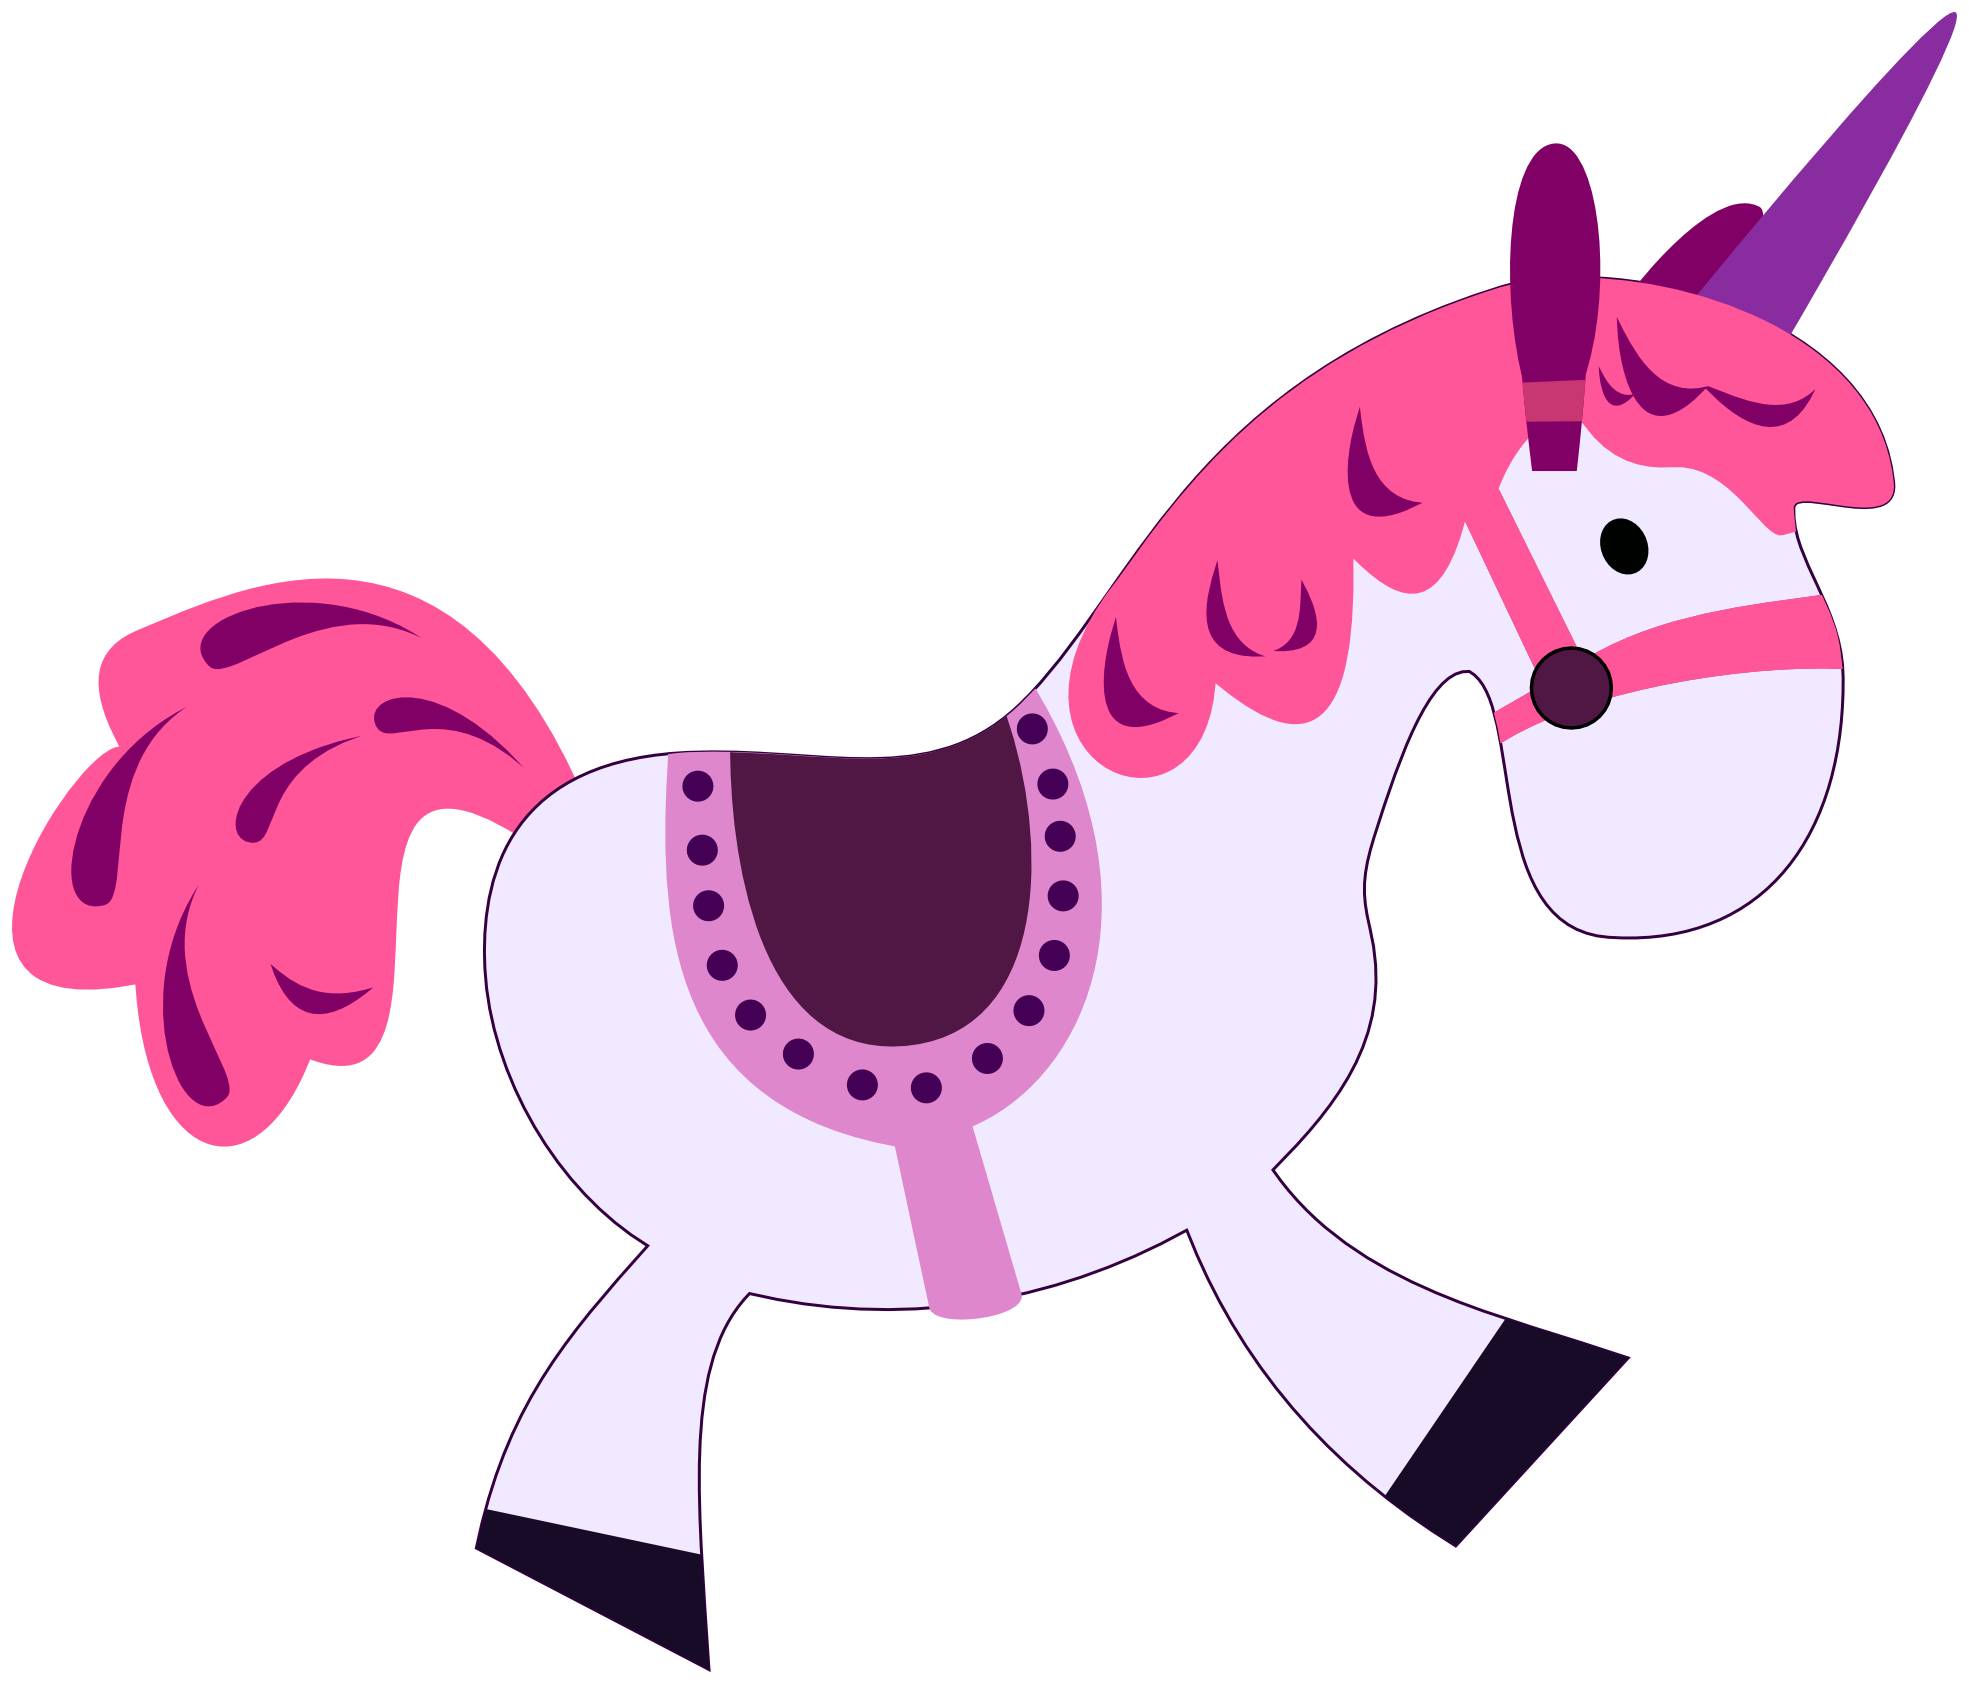 Toy Unicorn 33px Png 1 K  Toy Unicorn 111px Png 7 K  Toy Unicorn Png    